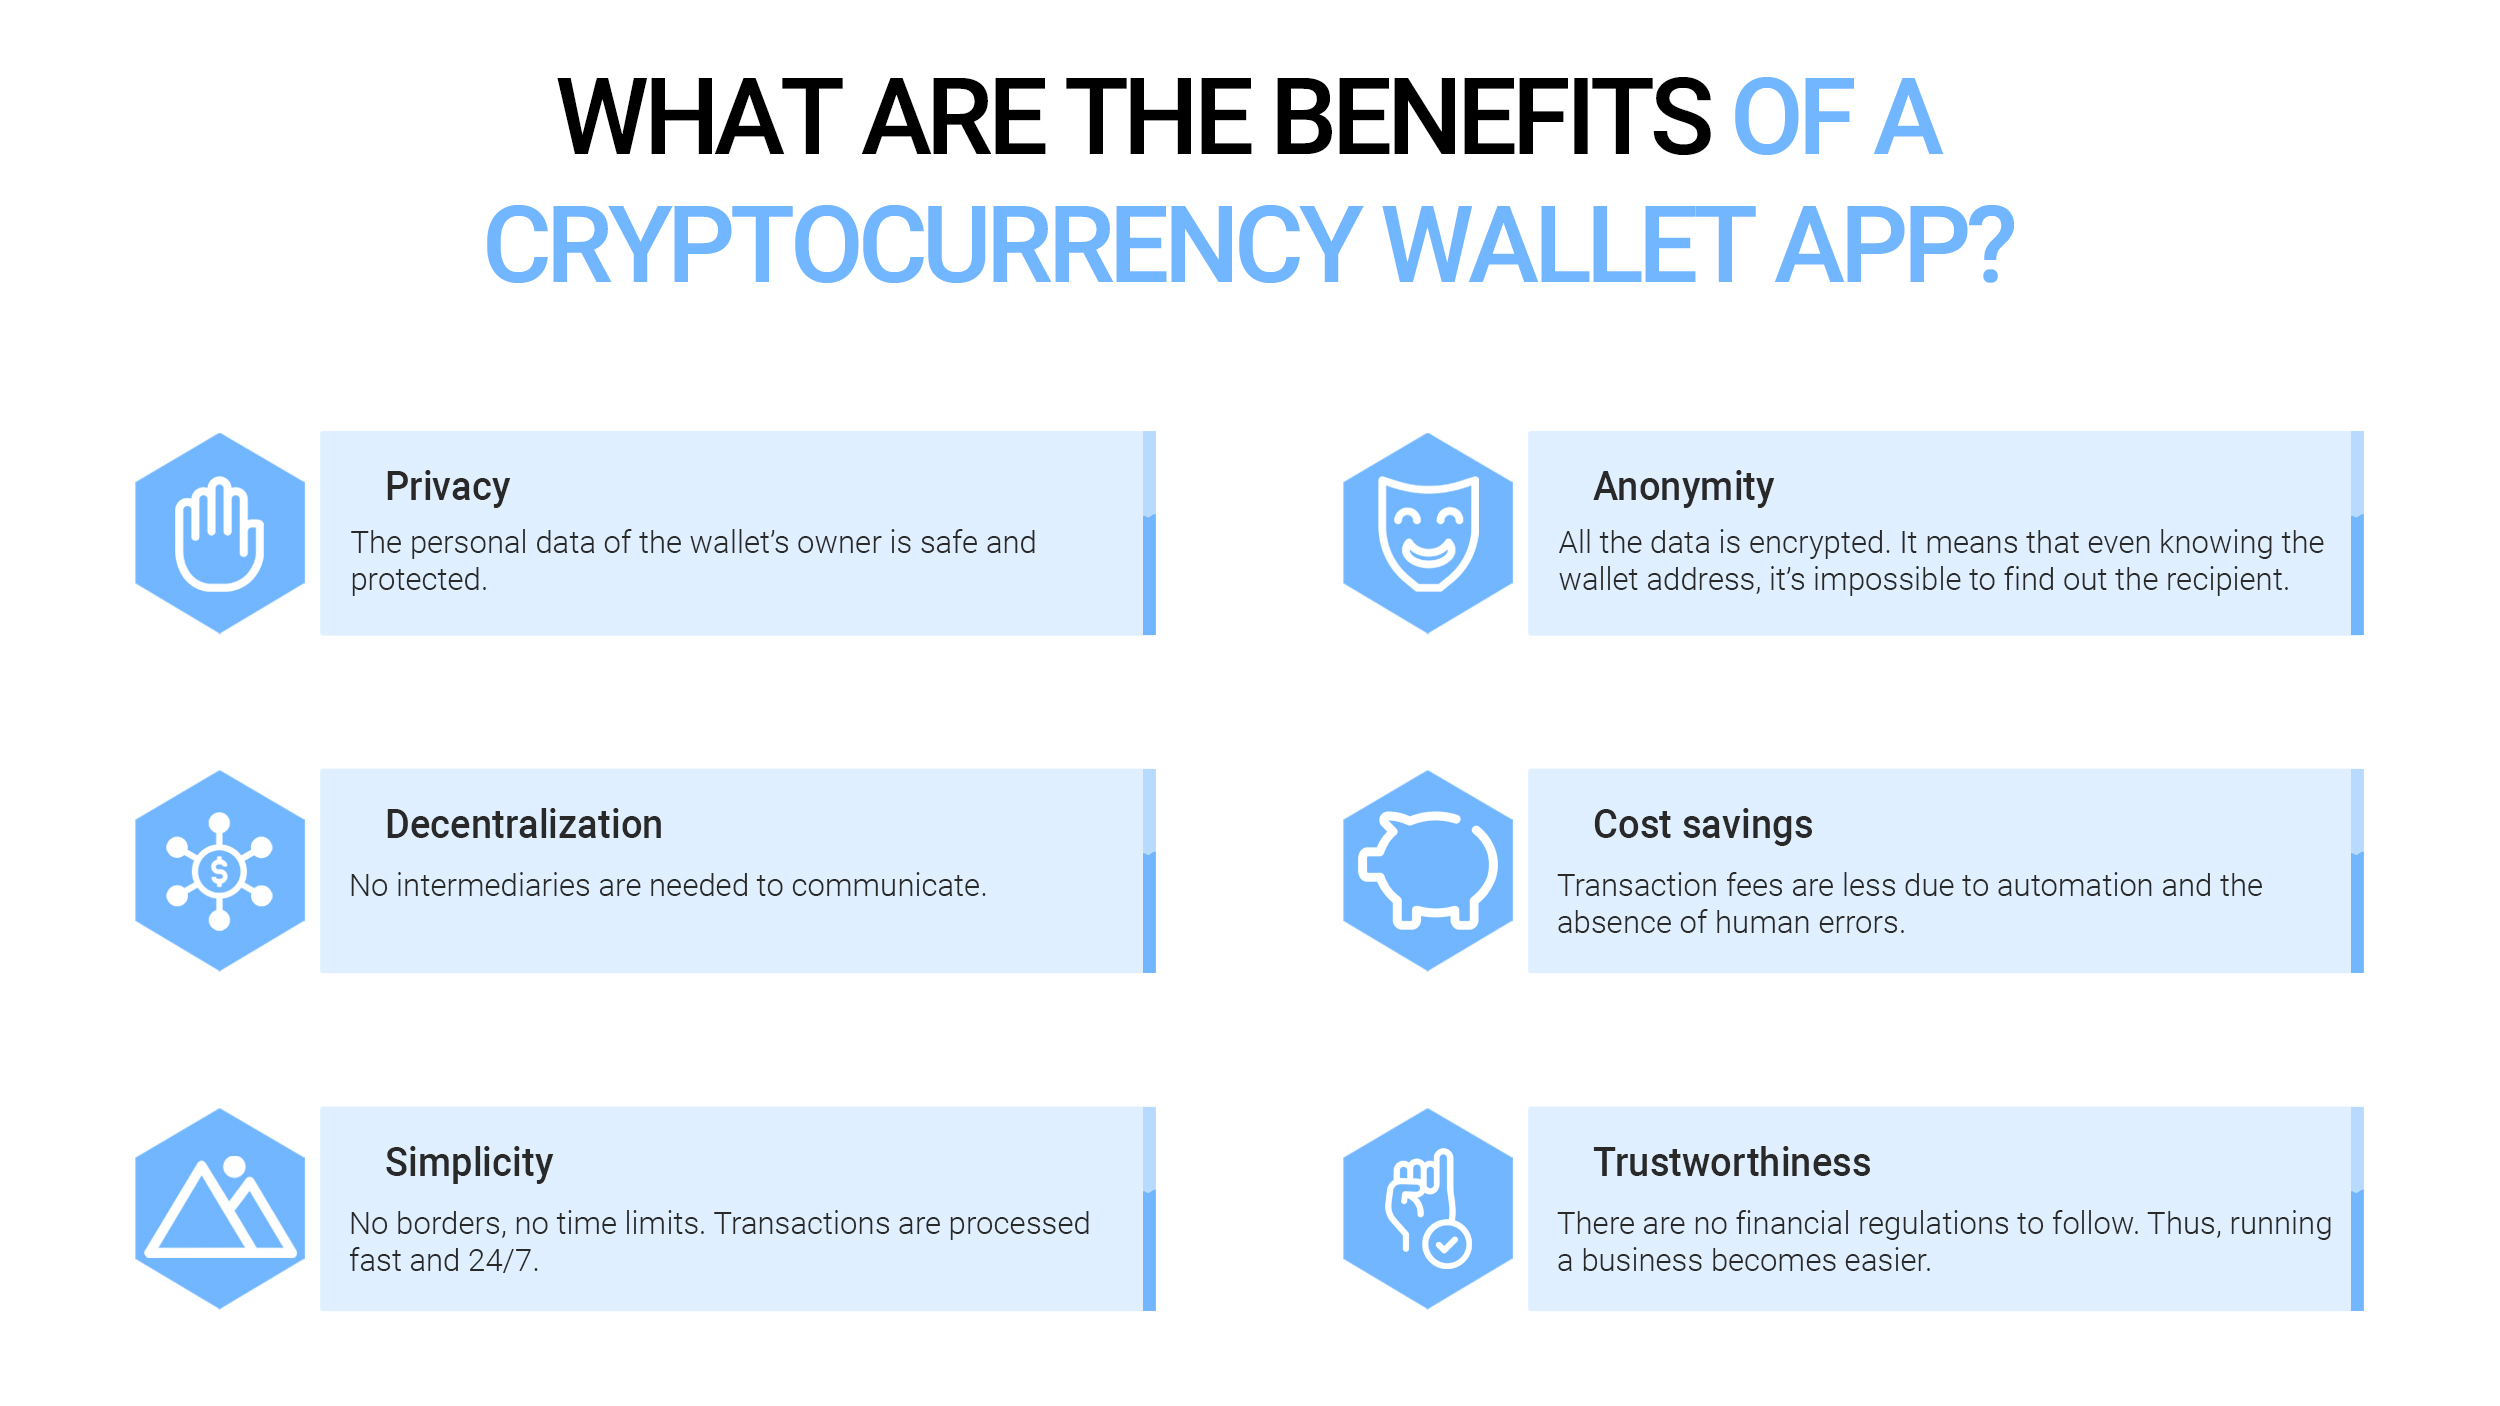 What are the benefits of a cryptocurrency wallet app